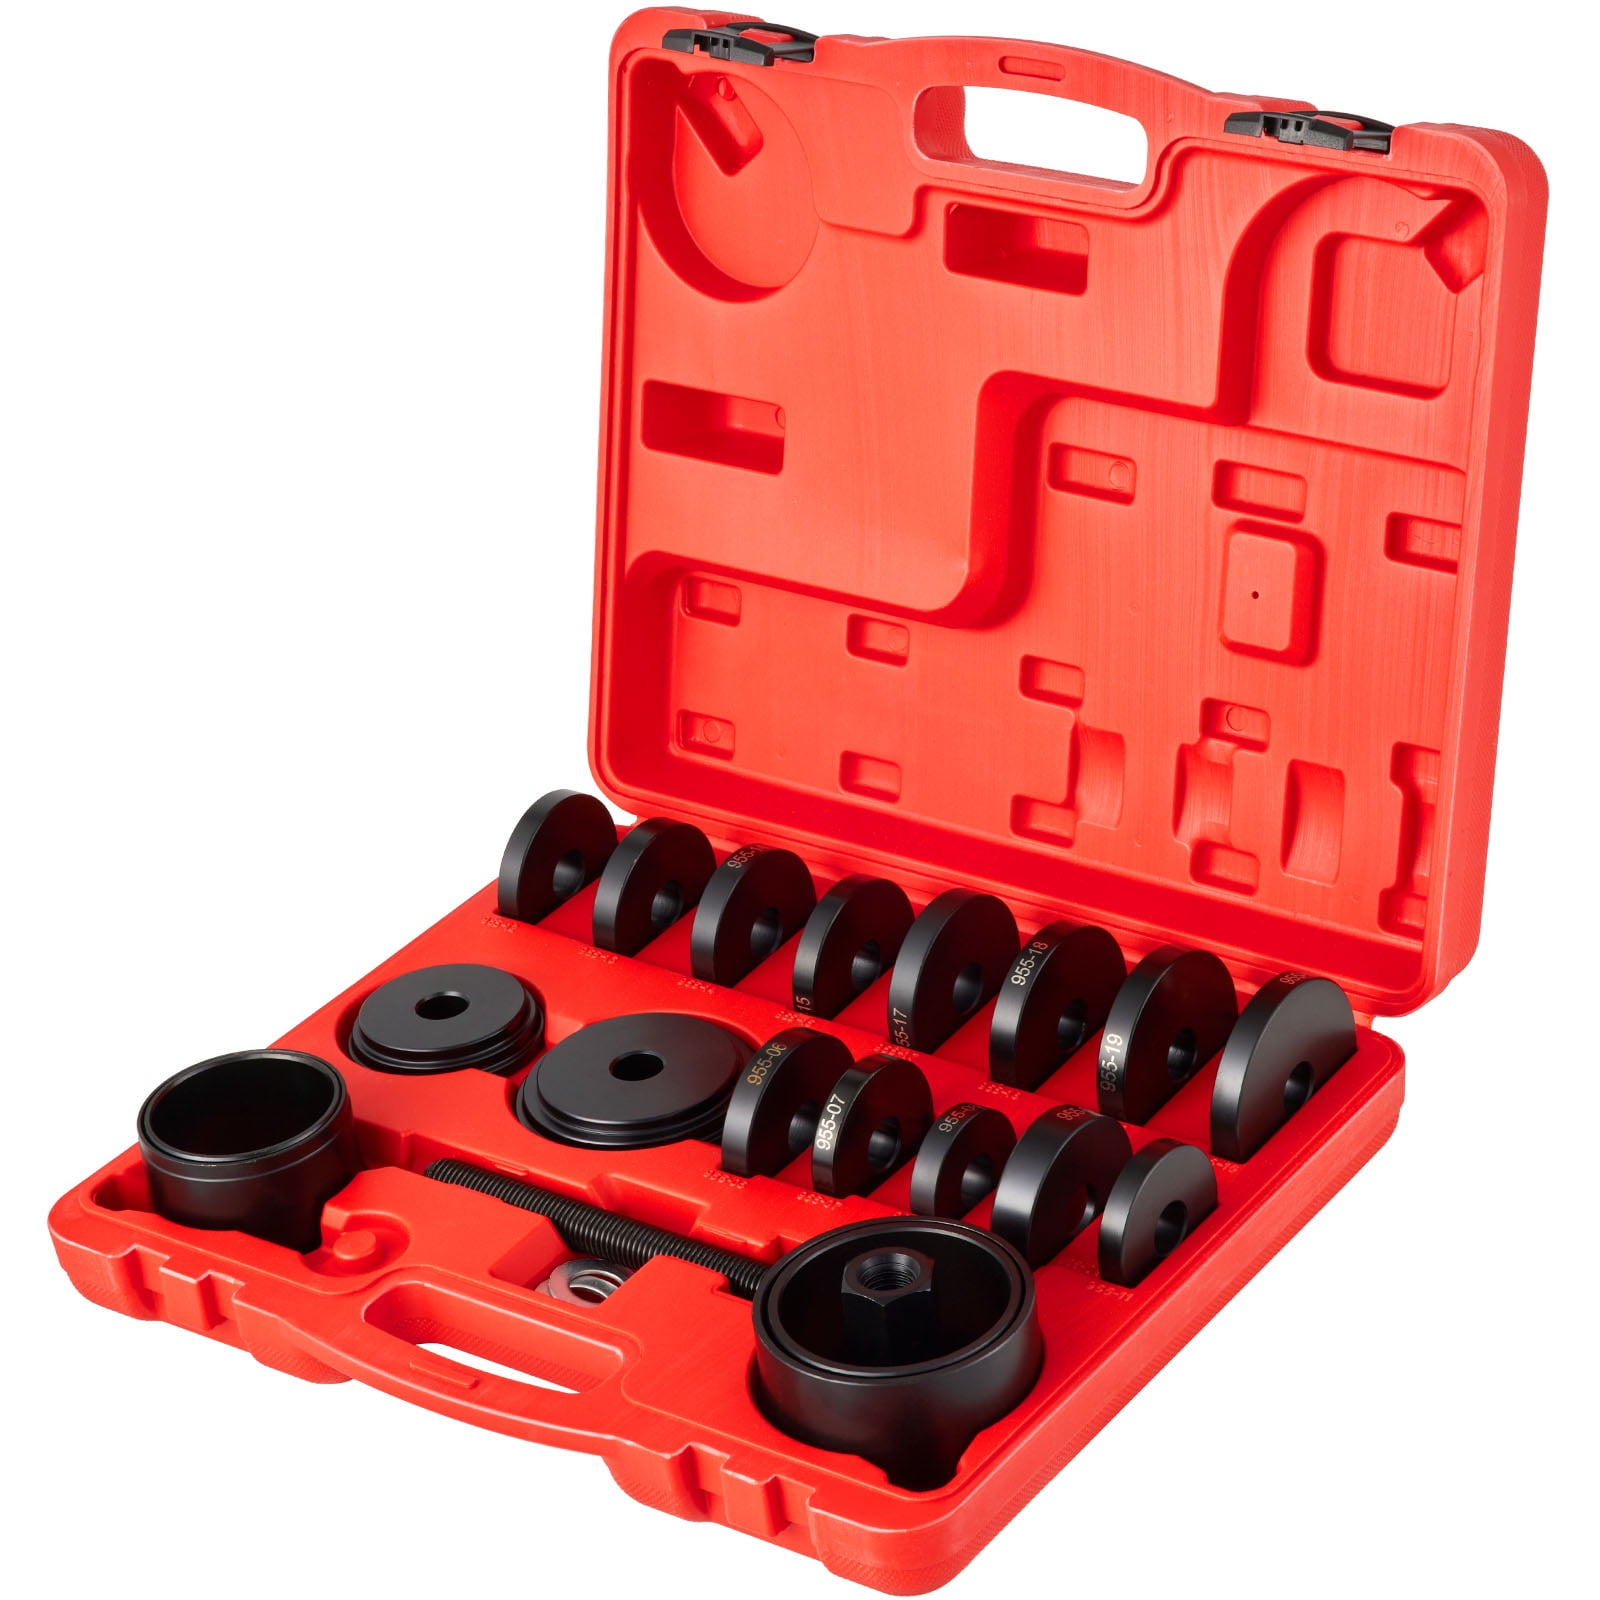 Pressure foot set (removal) for screwed wheel bearing units, Radlager  Werkzeug Kfz, Screwed wheel bearing tool sets, Motor/commercial vehicle  specialty tools, product worlds